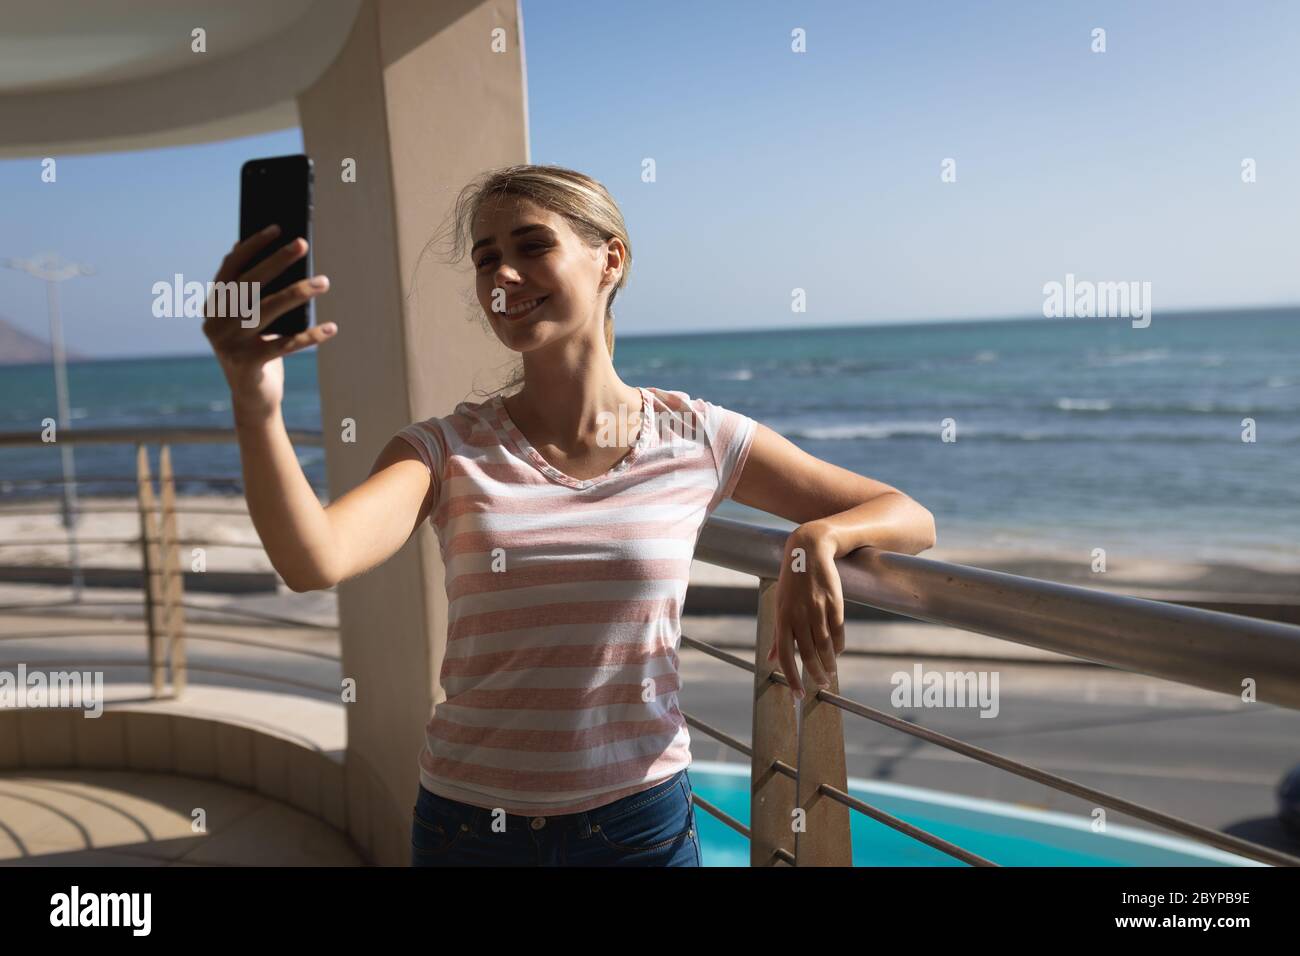 Caucasian woman standing on a balcony holding a smartphone and taking a selfie Stock Photo